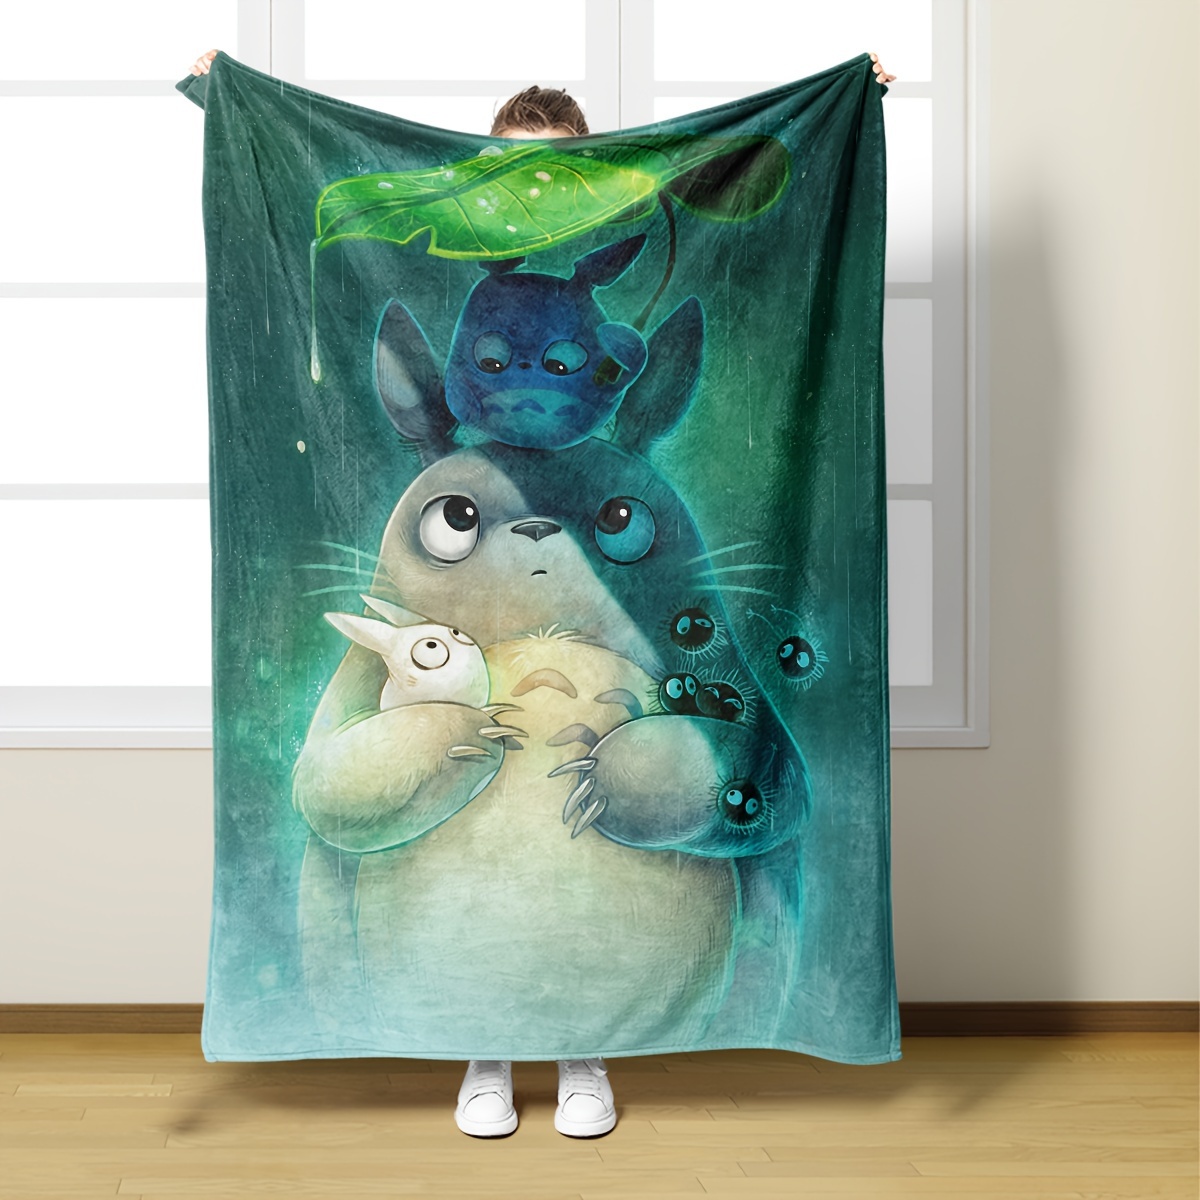 

otaku Must-have" Cozy Anime-inspired Throw Blanket - Perfect For All Seasons, Ideal For Office Naps & Bed/sofa Decor, Great Birthday Gift For Anime Fans